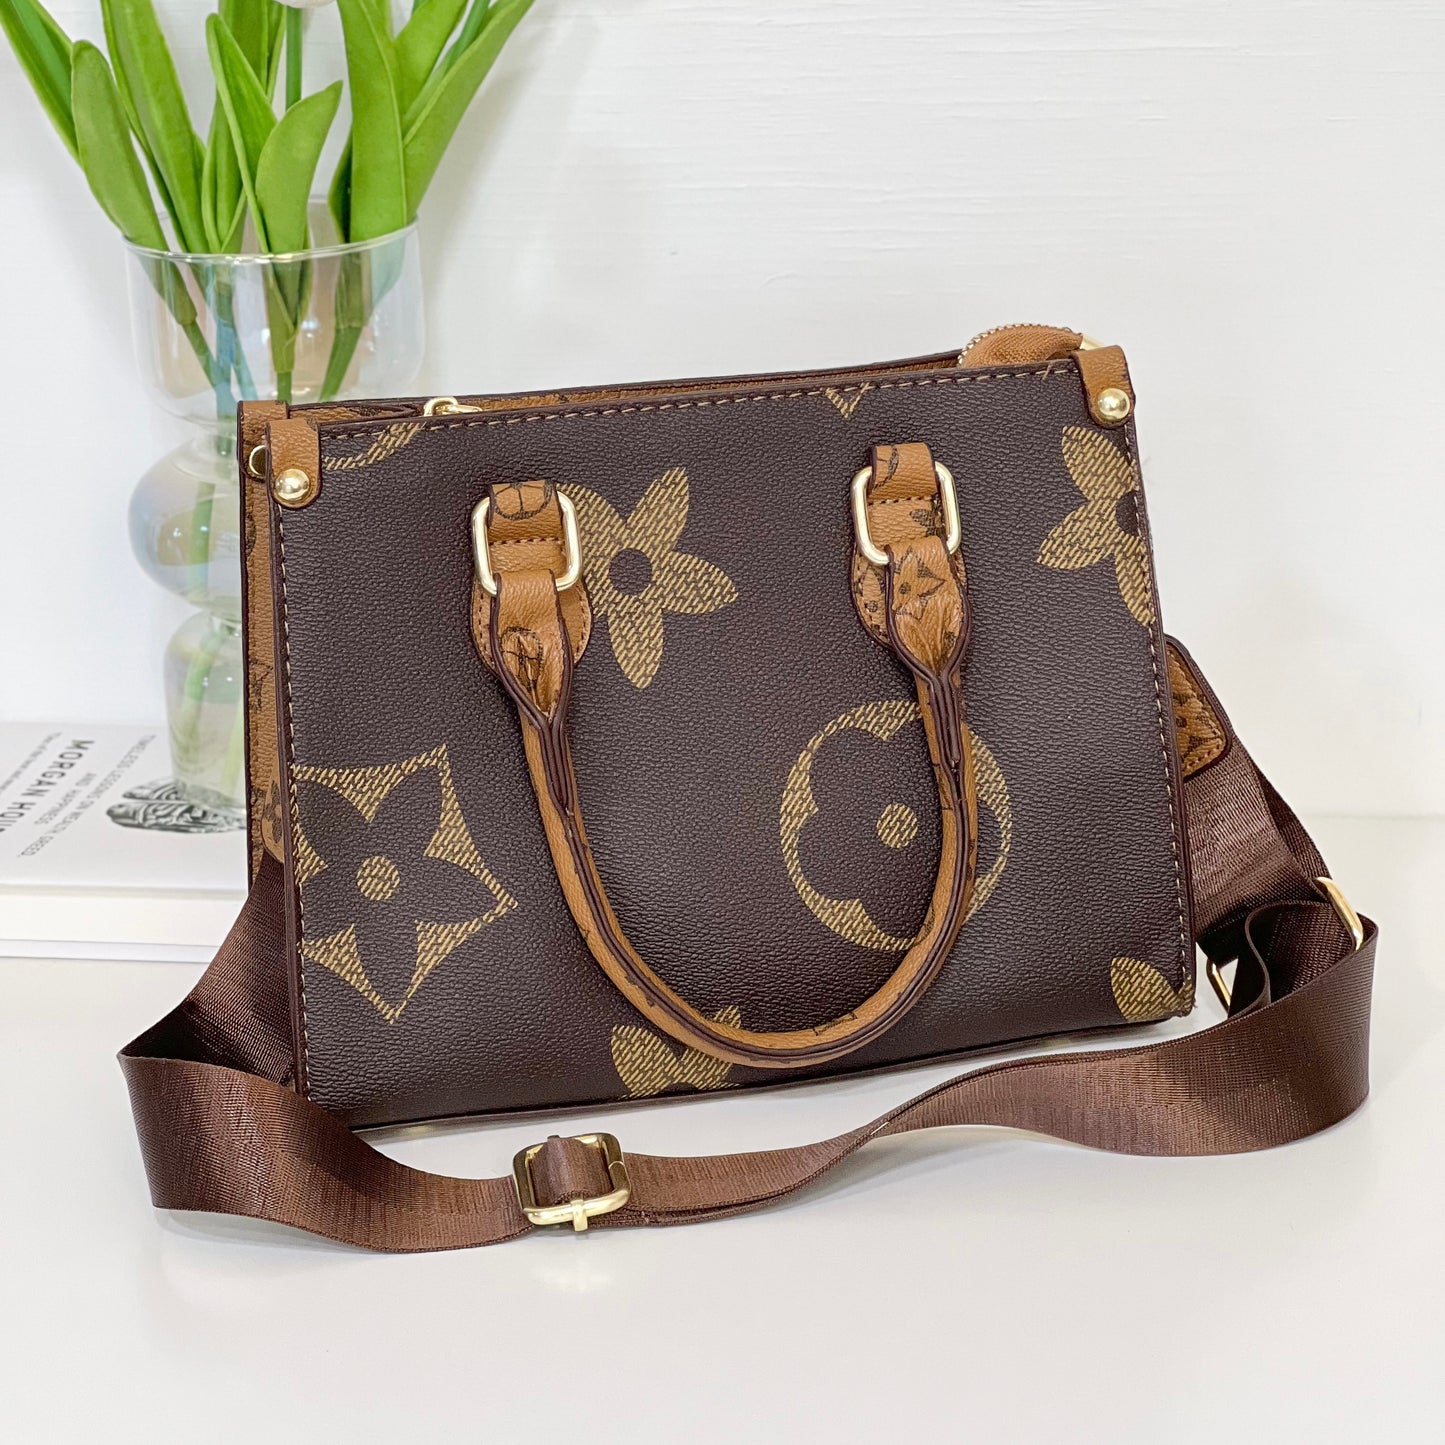 Vintage Crossbody Bag ( 5 colors available )